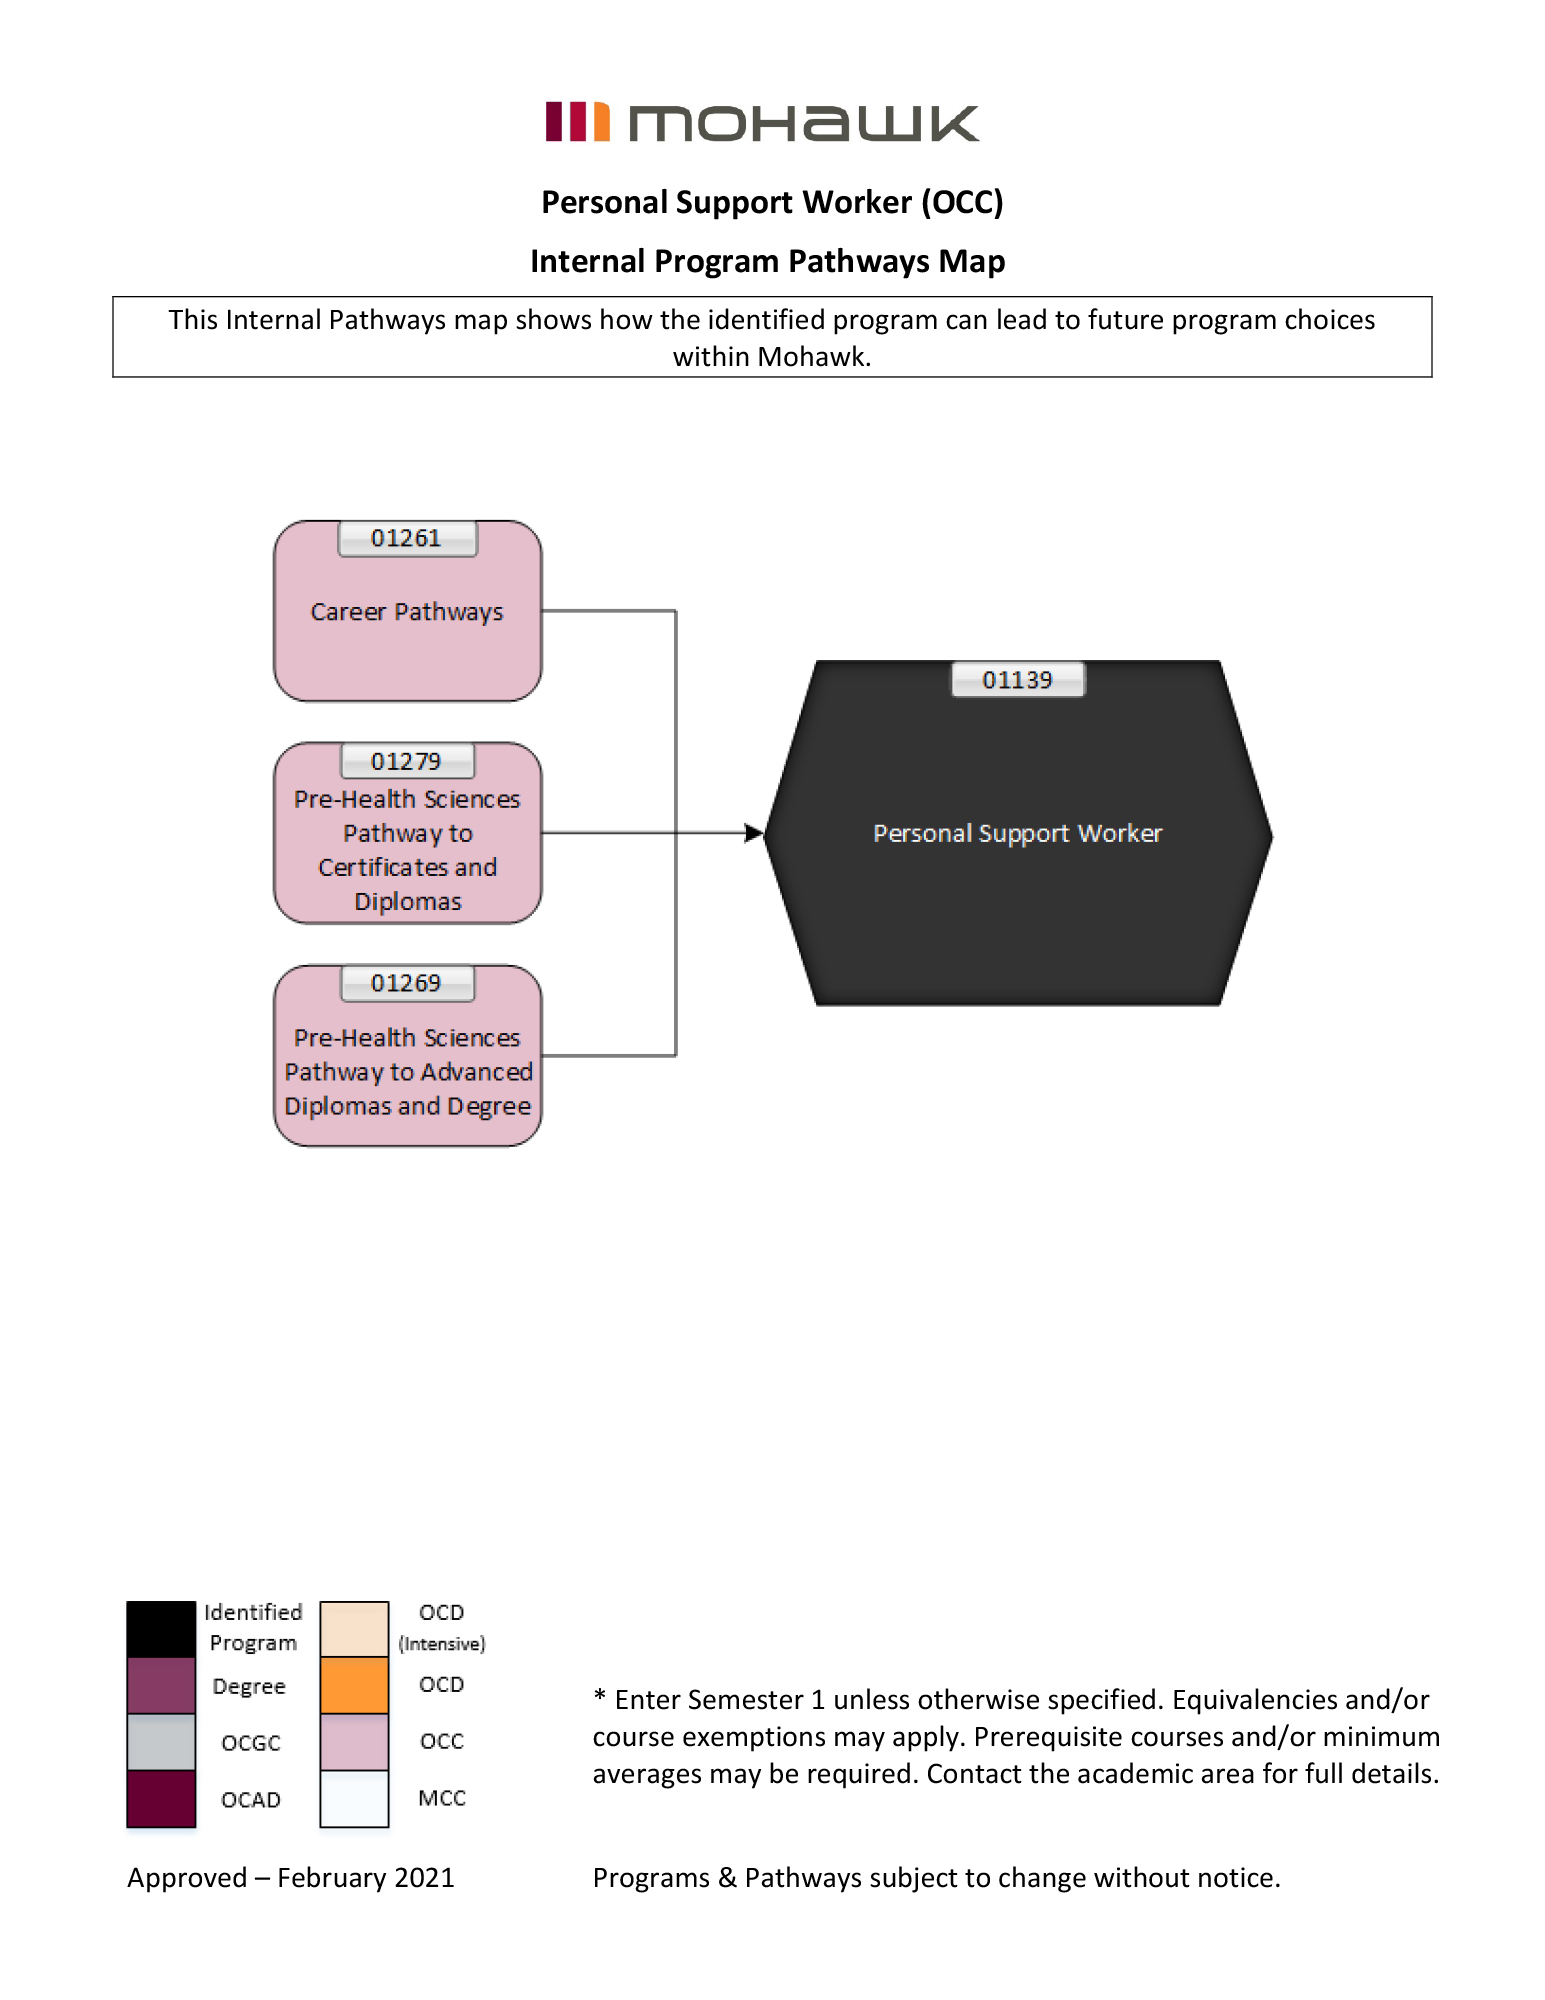 personal support worker pathways map